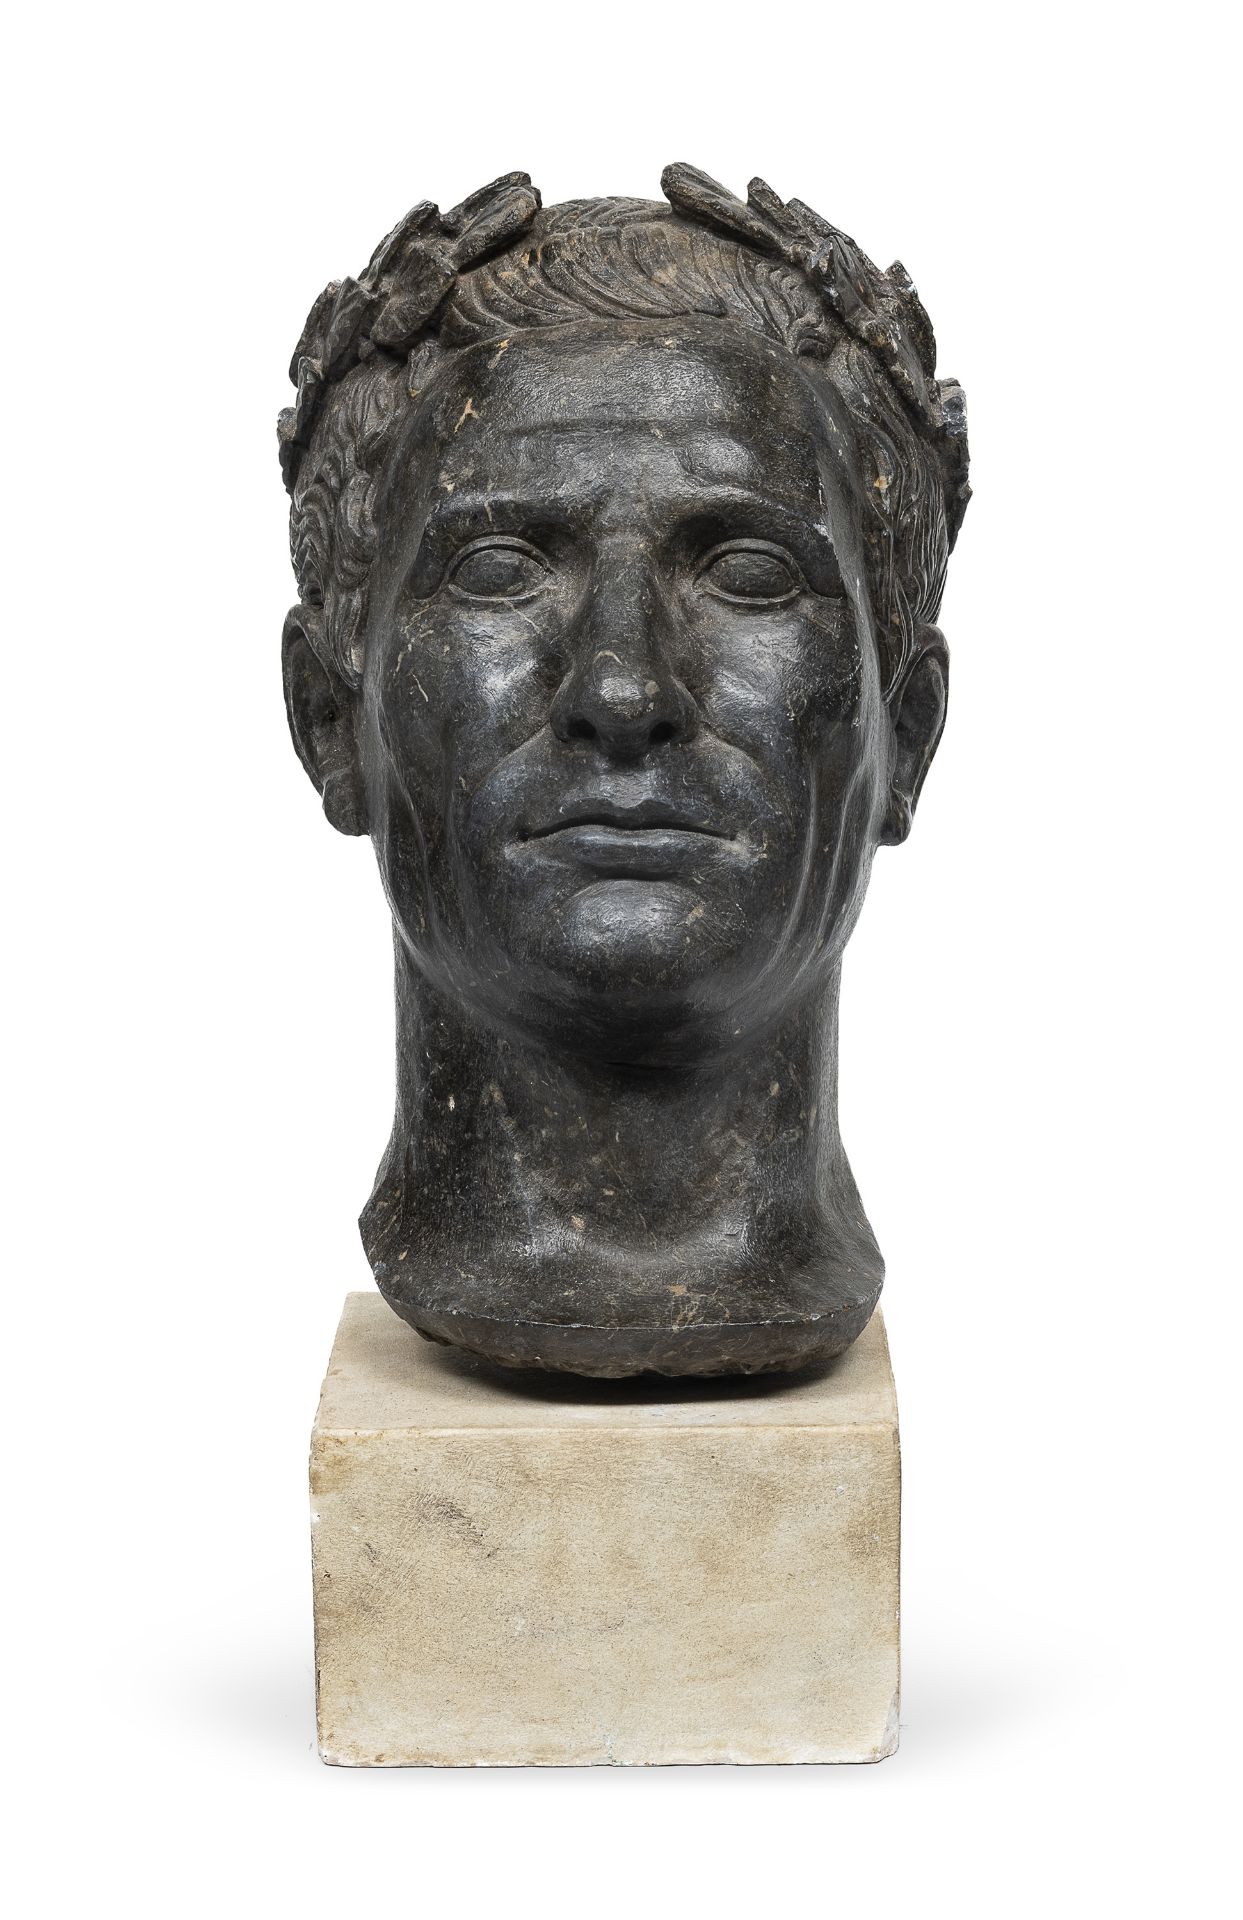 CAESAR'S HEAD IN ANCIENT GREEN MARBLE END OF THE 18TH CENTURY